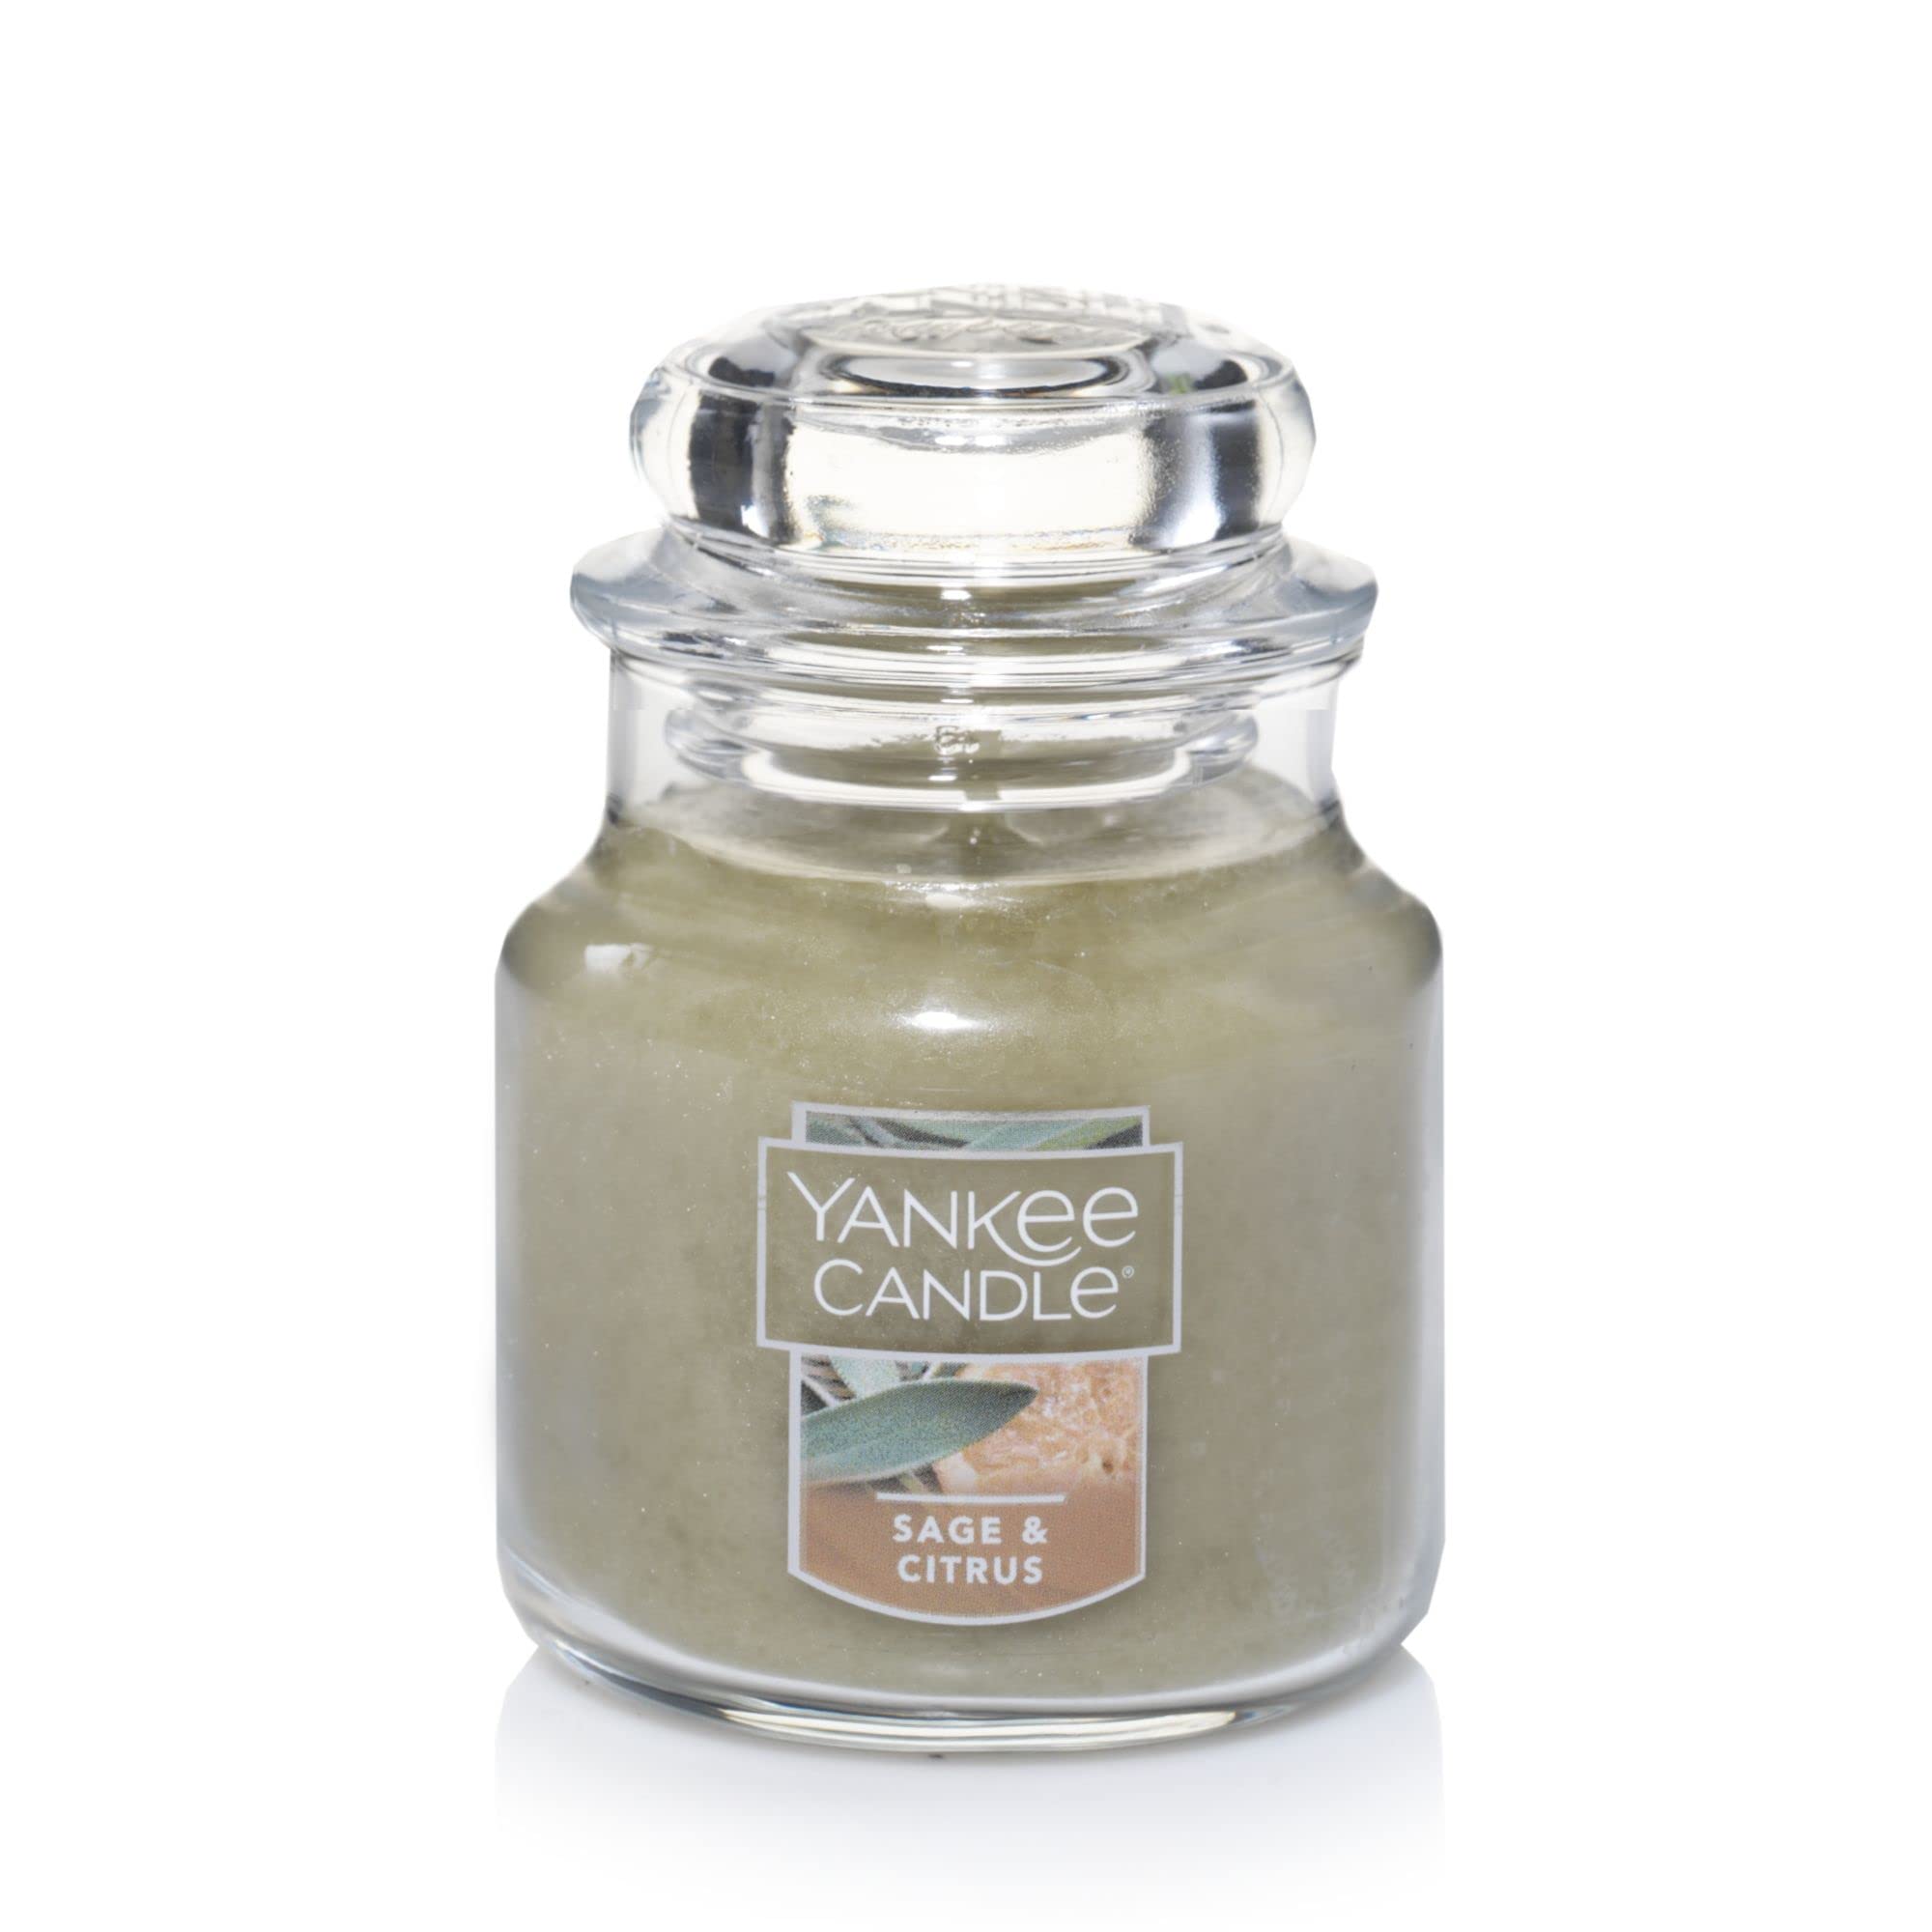 Yankee Candle Sage & Citrus Small Jar Candle, Fresh Scent